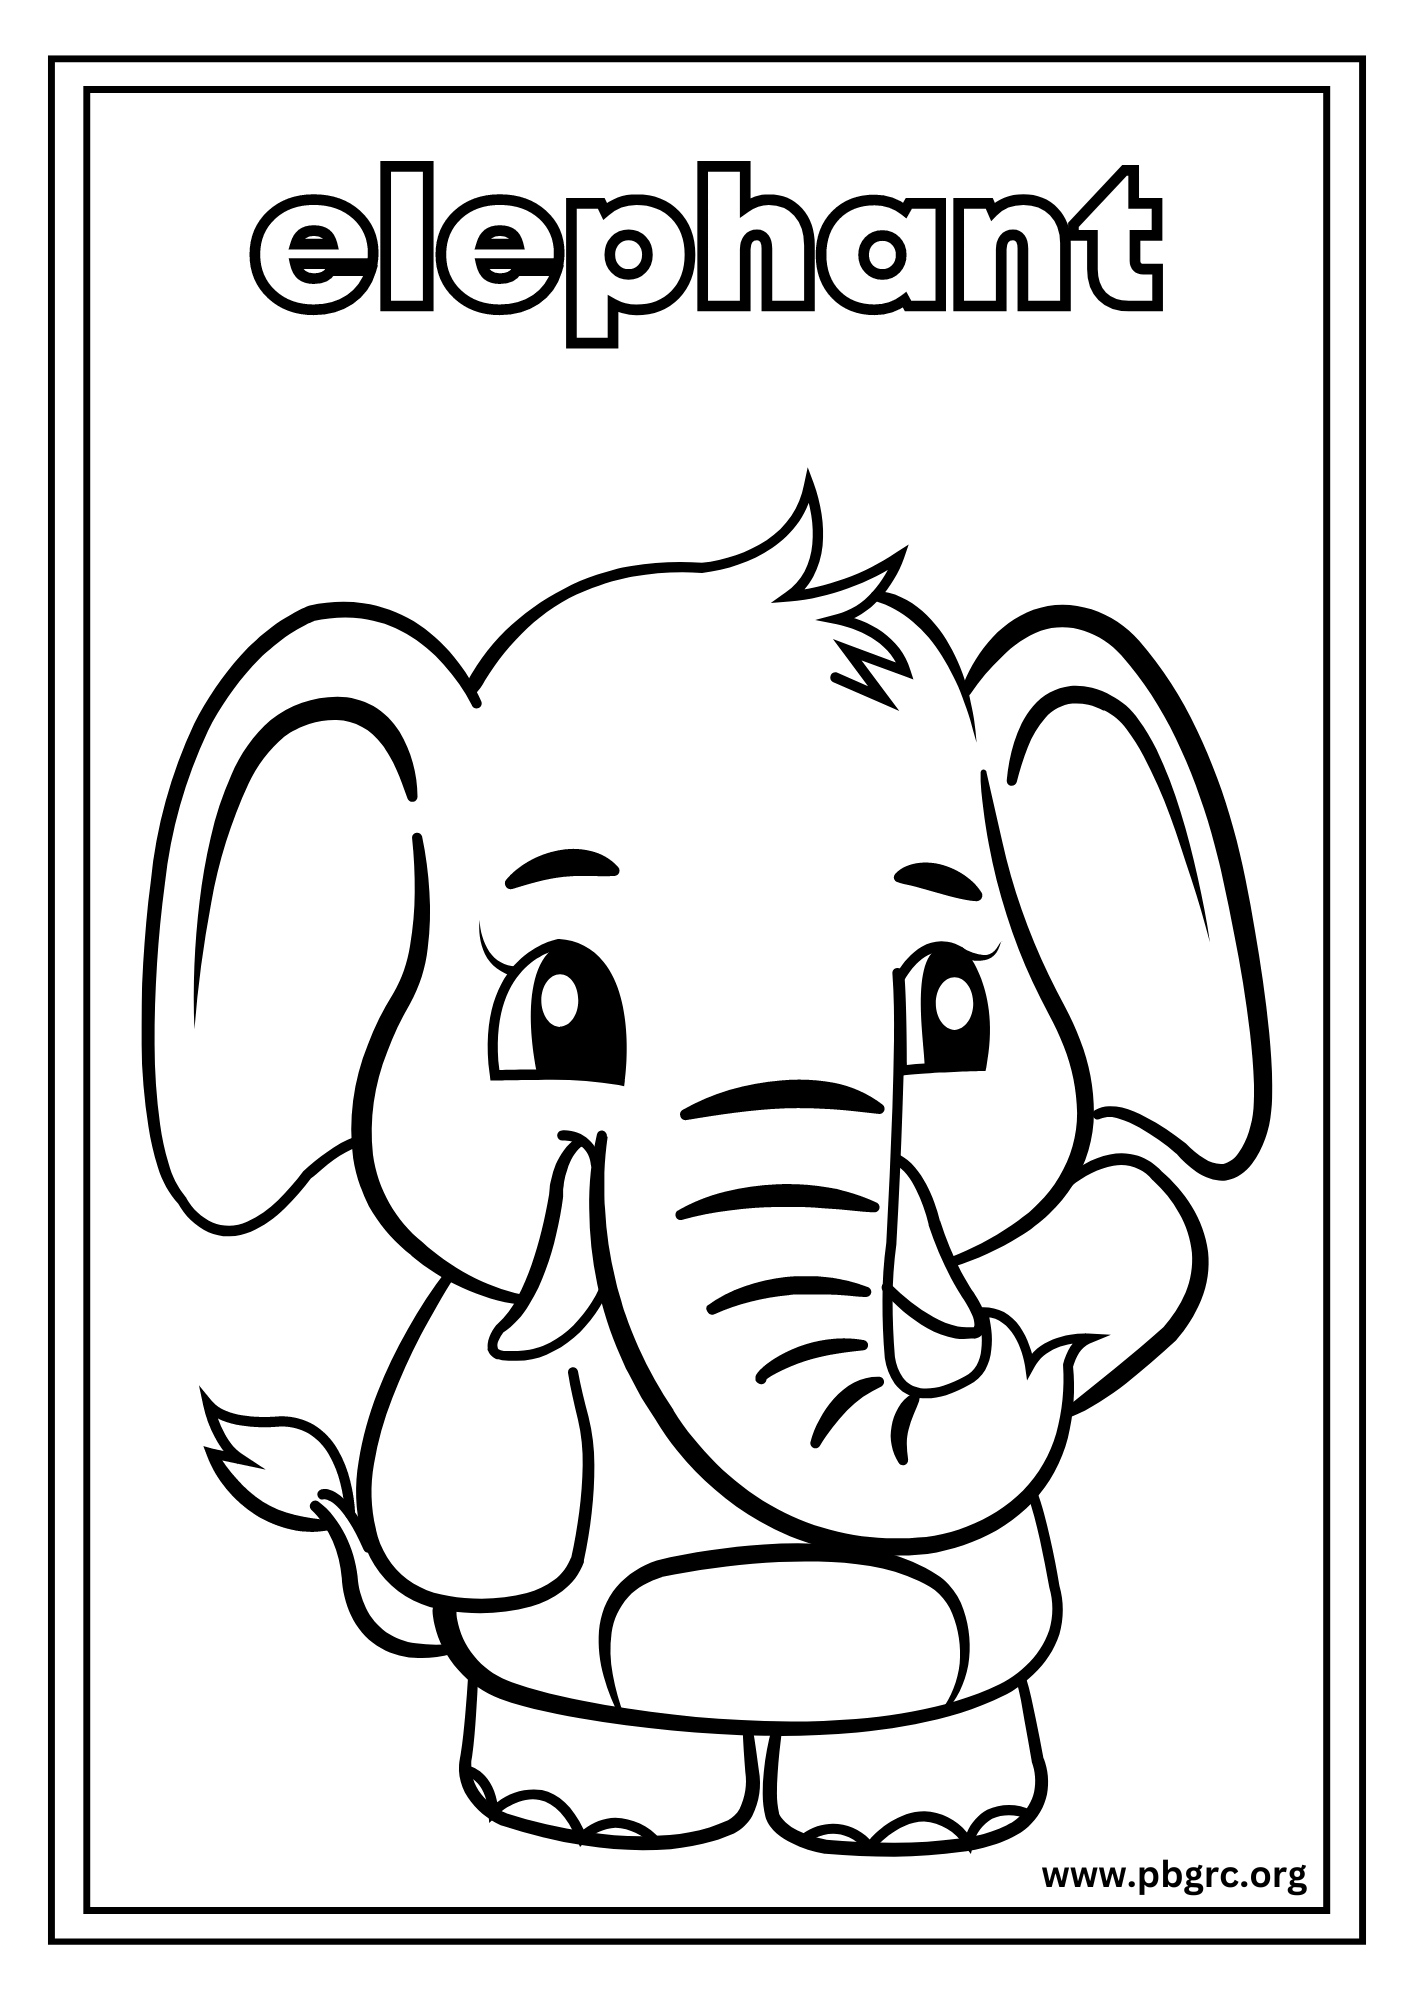 Elephant Coloring Page